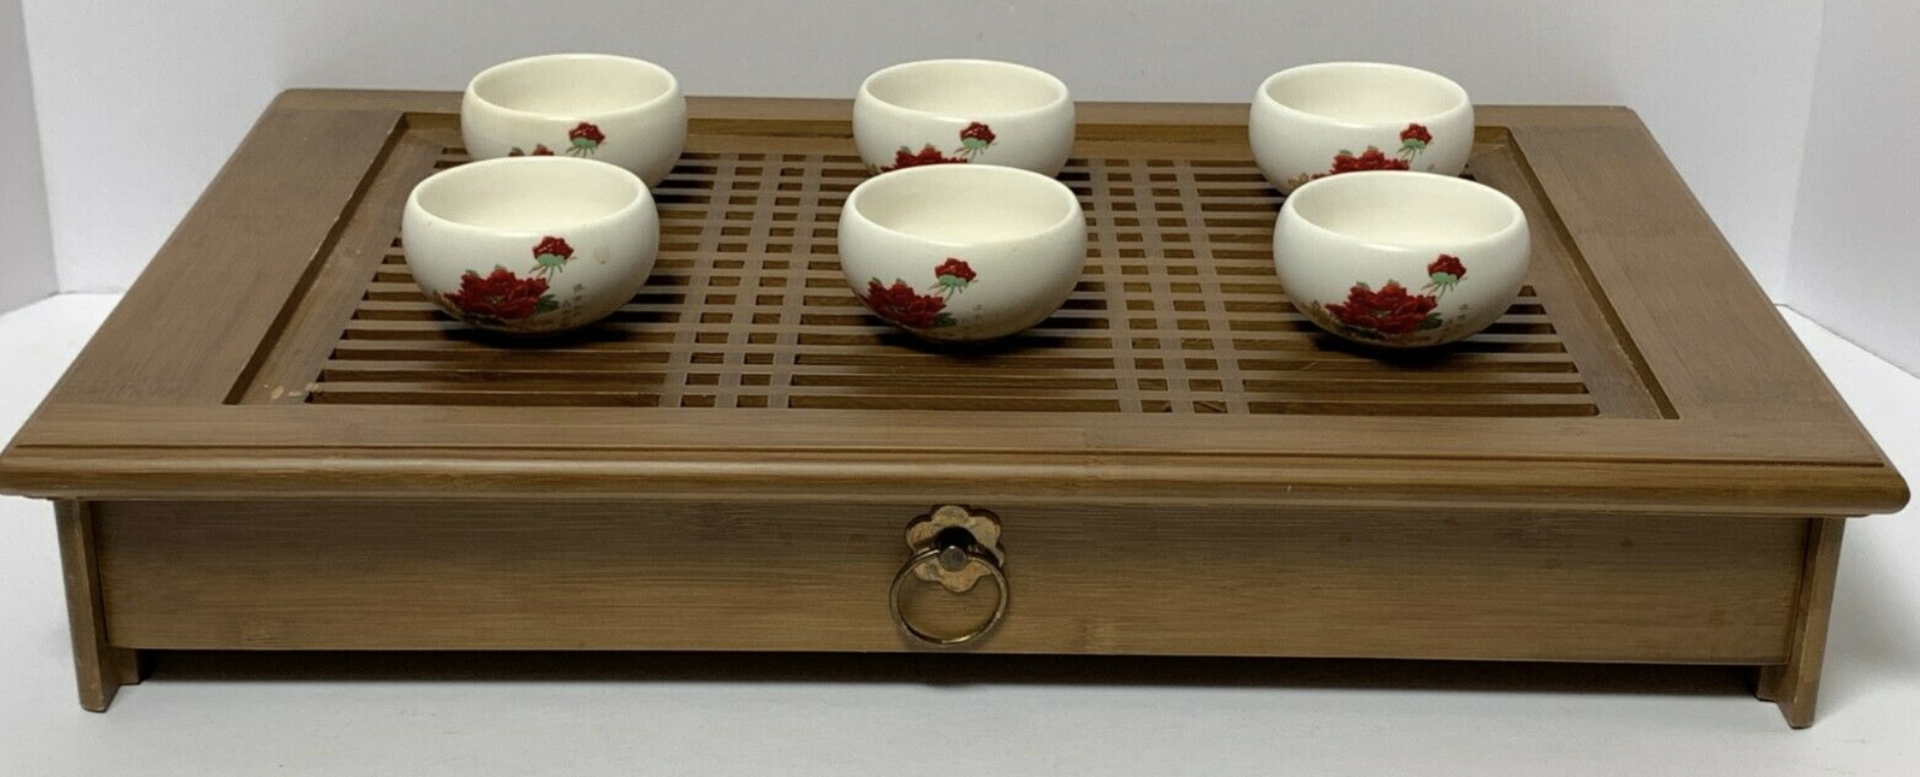 Eilong Taiwan 1987 Tea Cup Set of 6, with Wood Display Storage Unit with Drawer